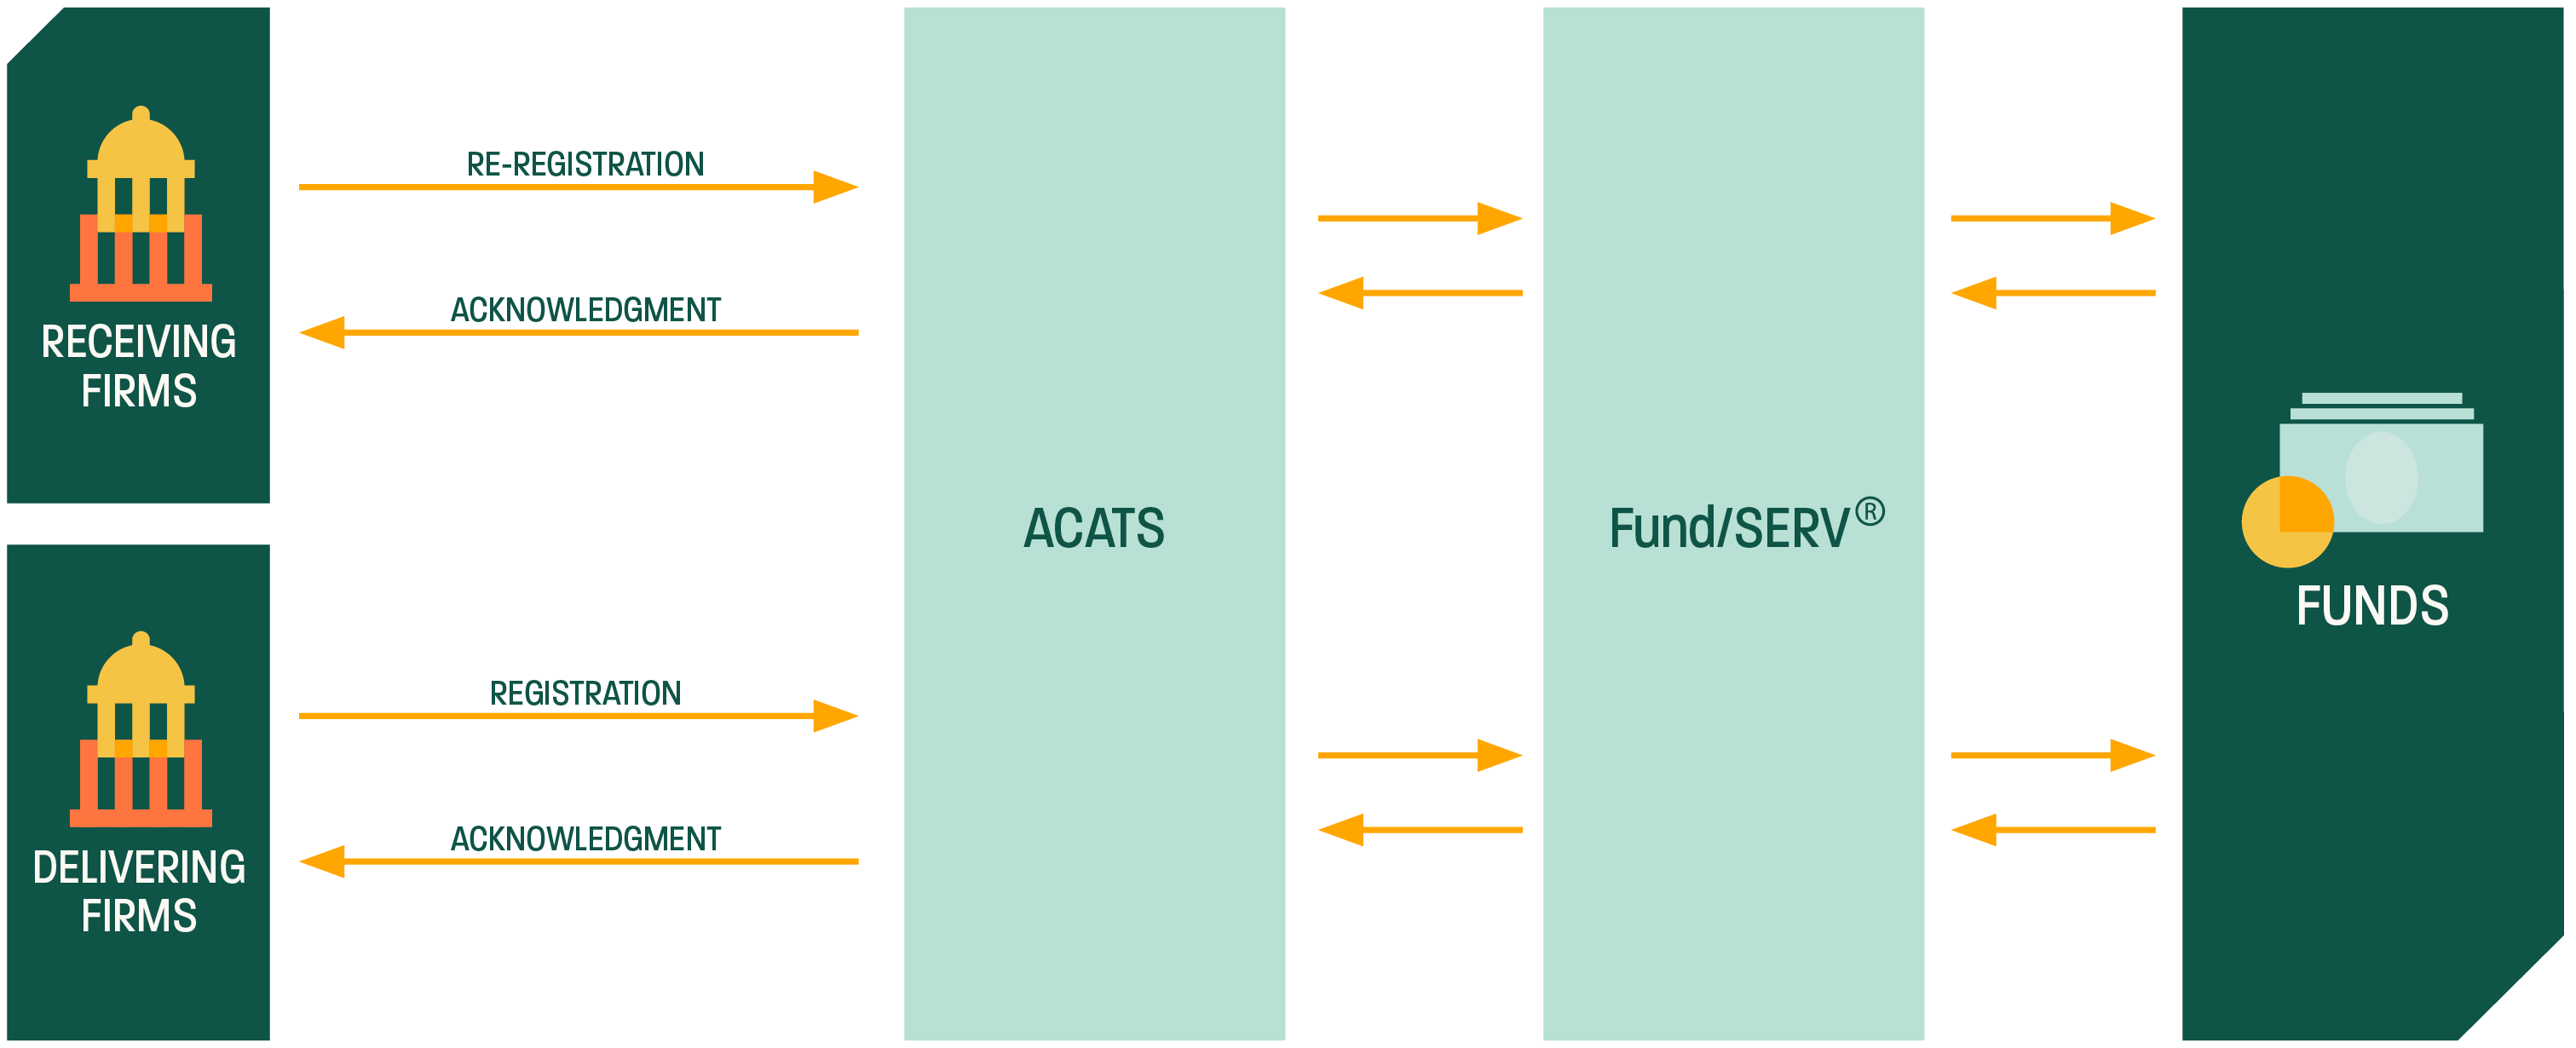 Mutual Fund Services - ACATS-Fund/SERV Firm to Firm Schematic